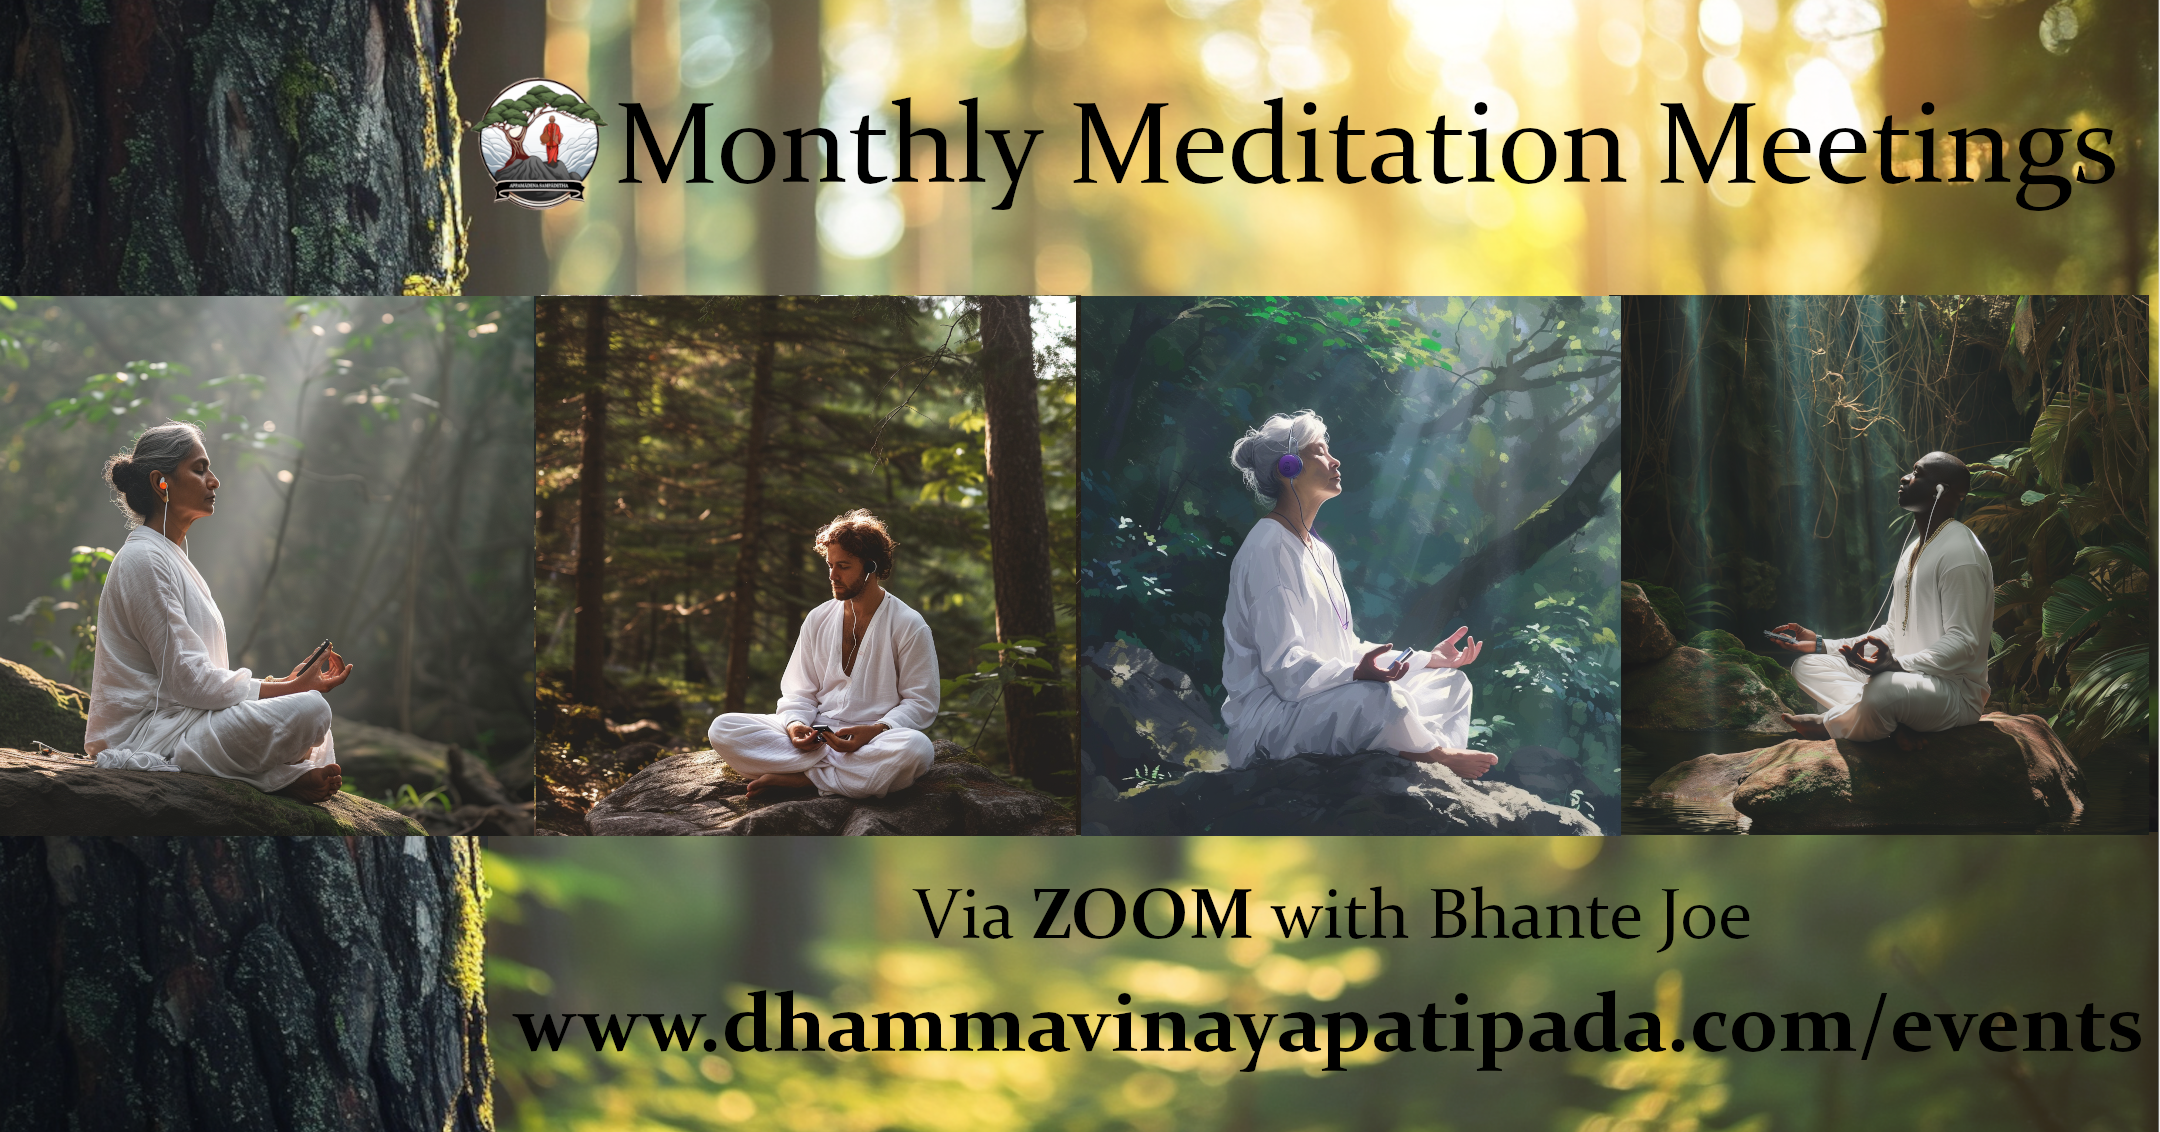 Monthly Meditation Meeting